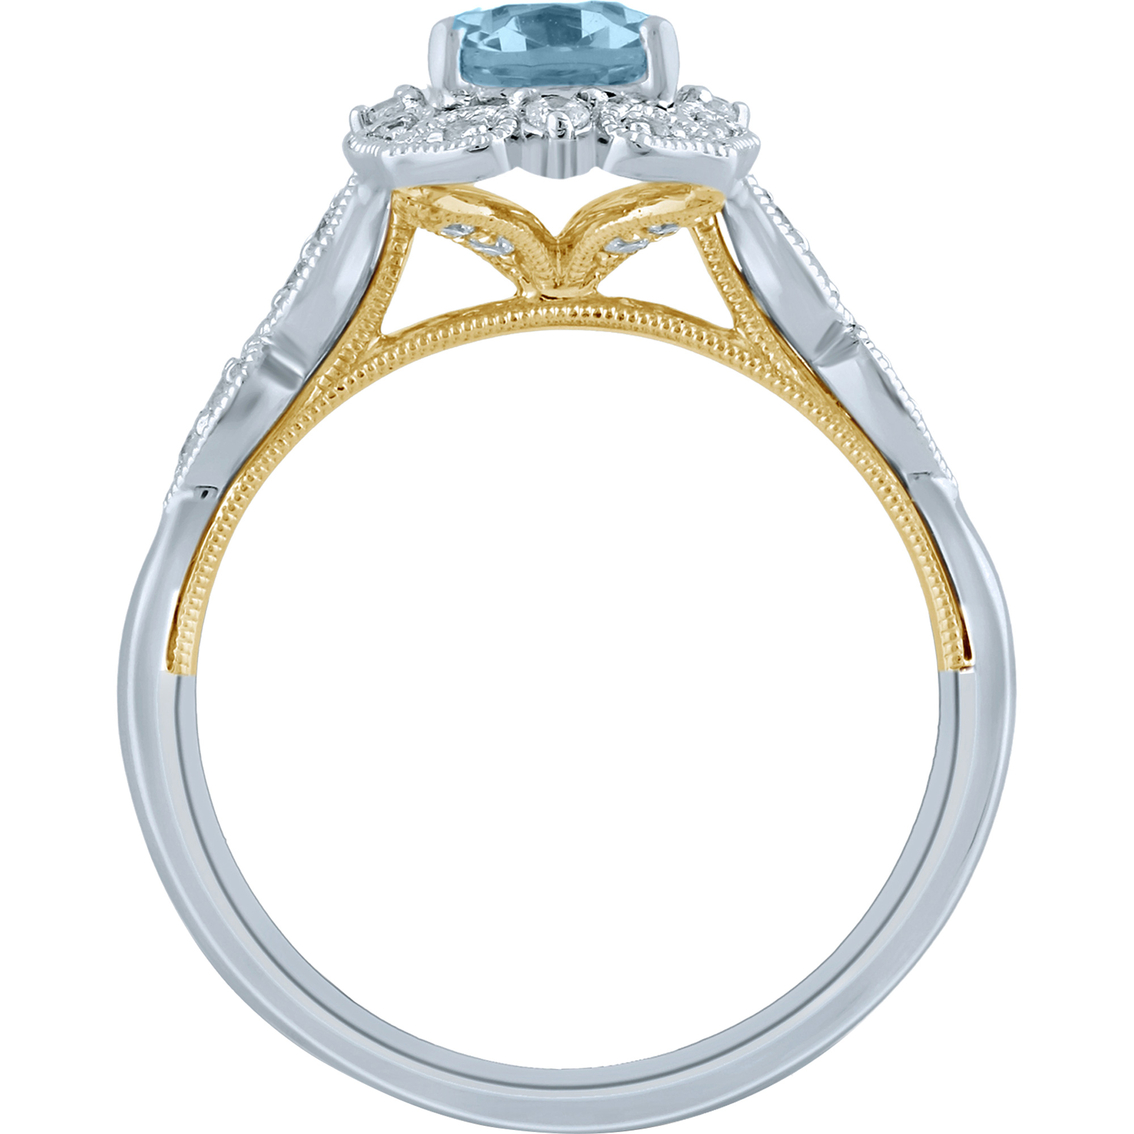 Truly Zac Posen 14K Two Tone Gold 1 3/4 CTW Sky Blue Topaz and Diamond Ring - Image 2 of 3